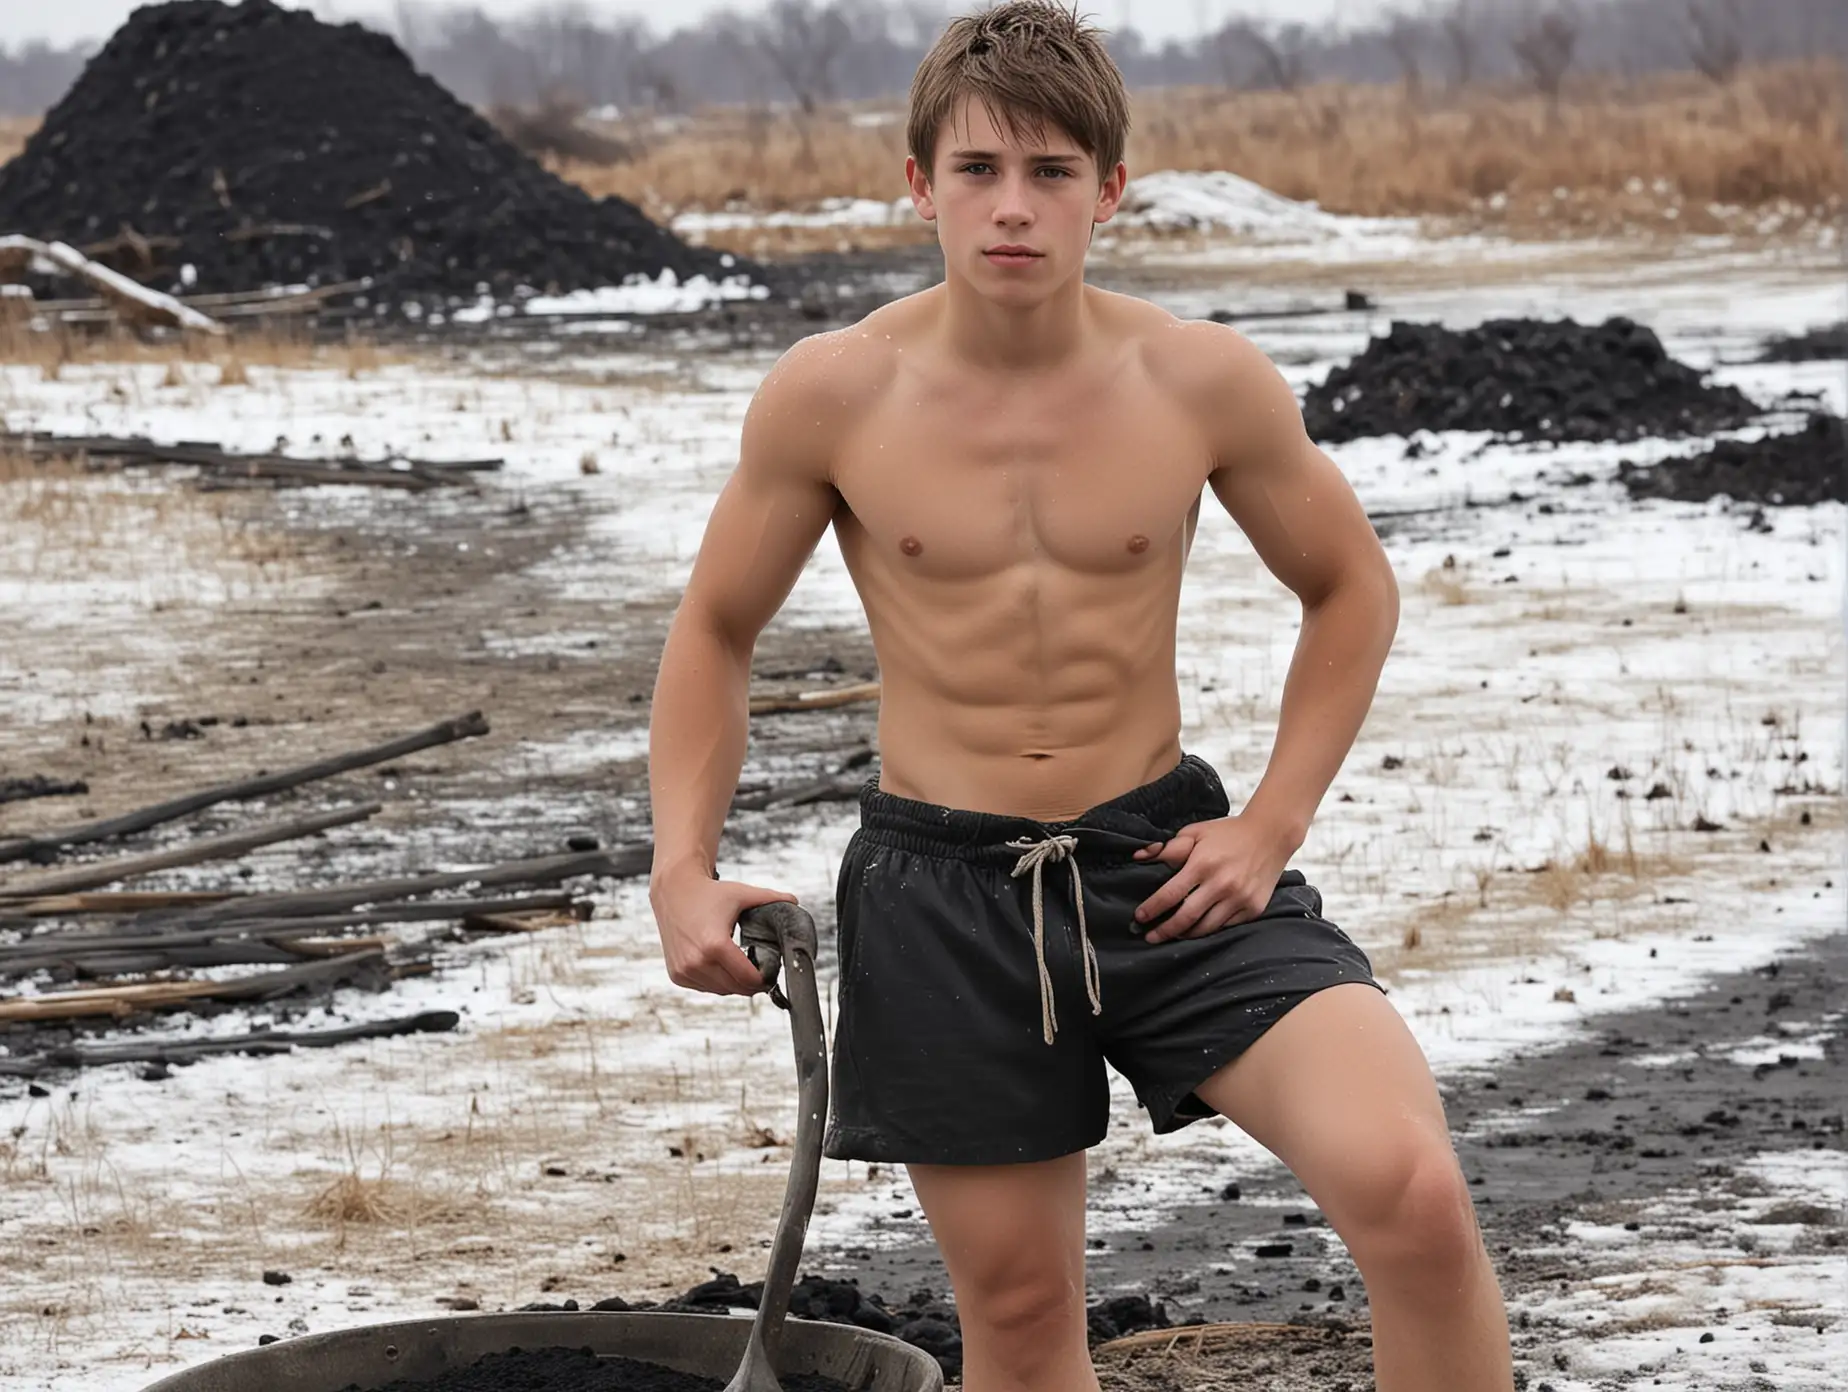 overseen by a cruel guard, a very cute young barefoot 18-year old teen boyish lean hungry starved filthy slave-boy, working in the windswept wintery conditions, in a hard-labor punishment coal-yard, dirty bare feet on sharp stony ground, shoveling coal onto a coal cart, , threadbare skimpy kids shorts are much too short for him, showing his bare upper thighs,  arctic winter snow, barefoot showing his dirty cold bare feet and toes,   naked except wearing a little boy's skimpy tight tiny low-rise revealing erotic extremely short crotch-length little boy's shorts, showing his bare naked upper thighs, tanned sweaty dirty, 